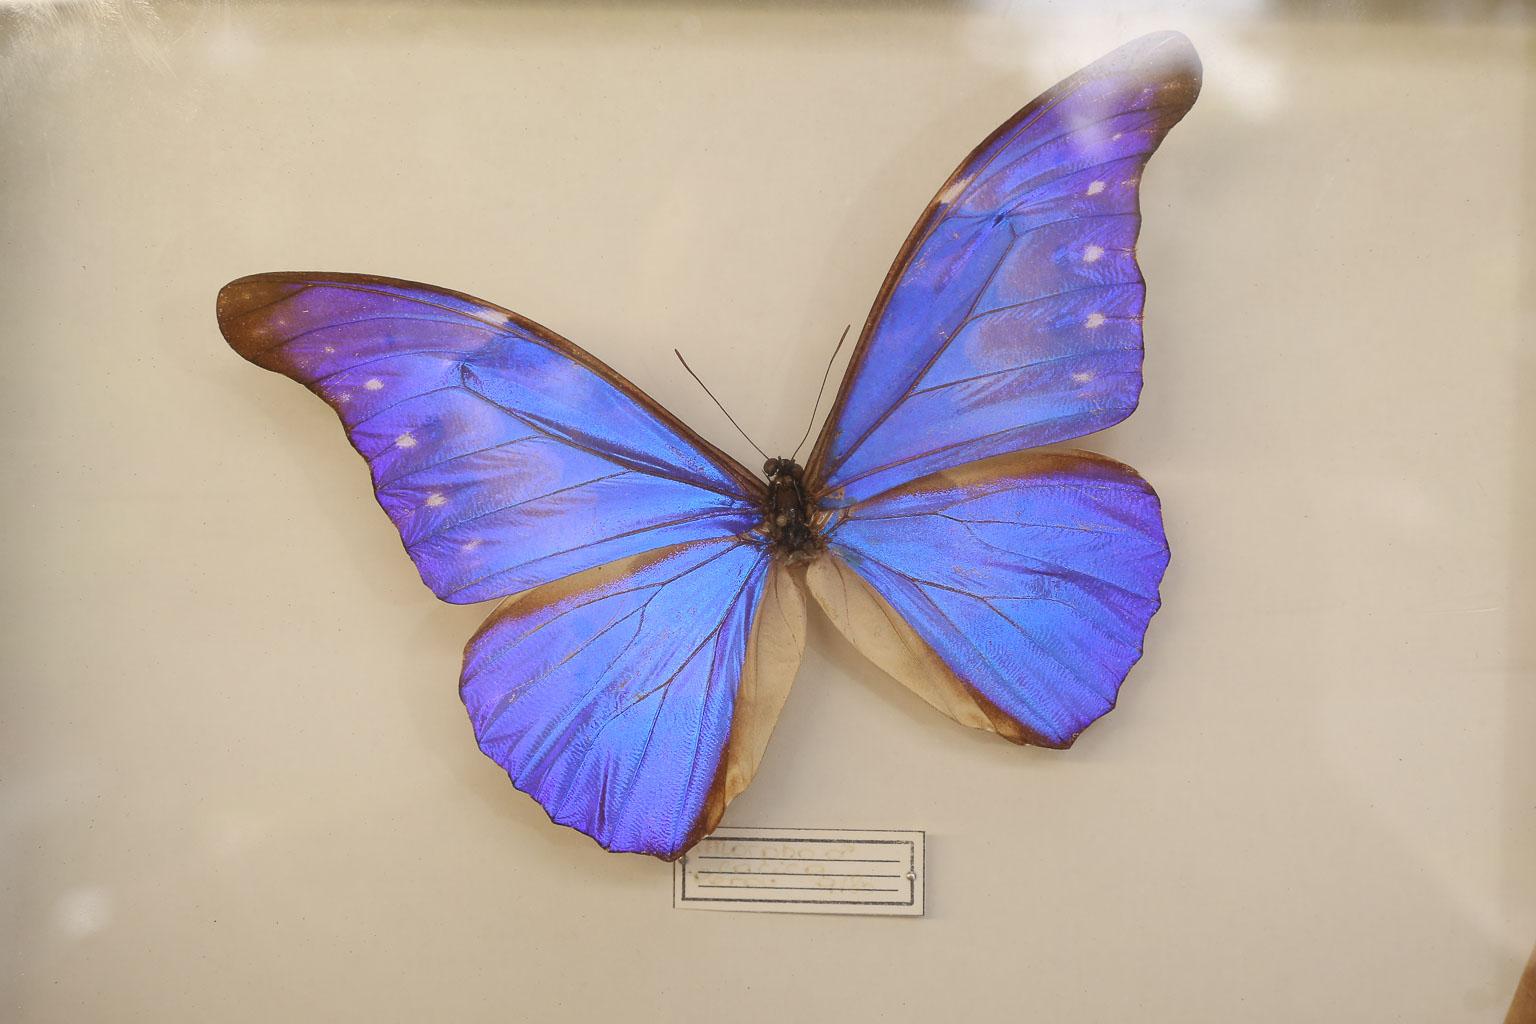 Found in France, this is a lovely butterfly study with one lavender, blue butterfly mounted in a shadow box.